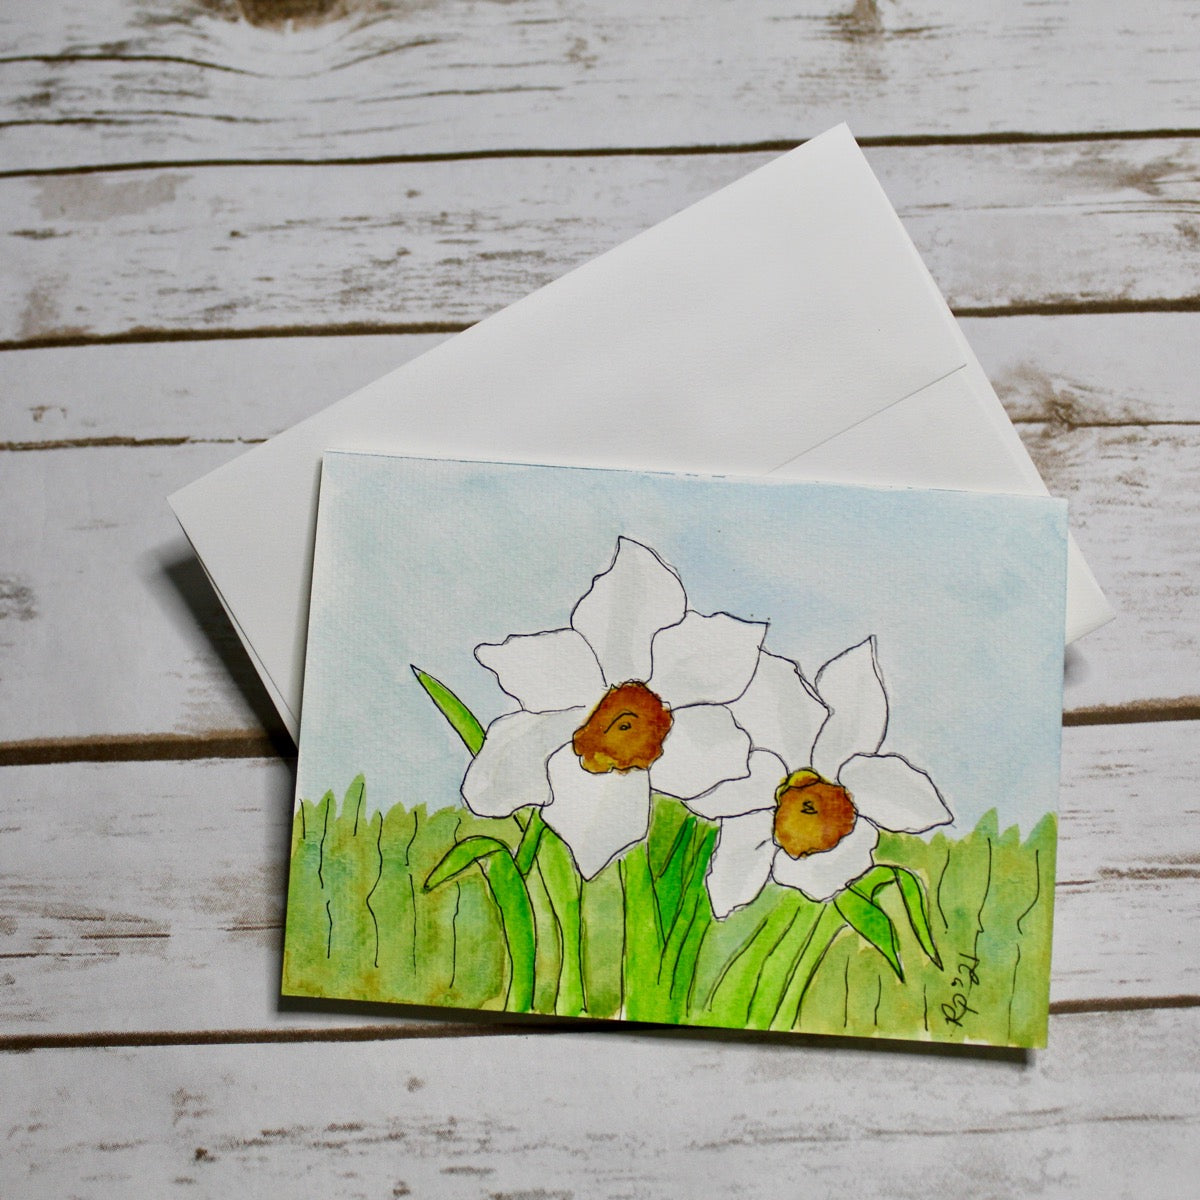 Original Hand-painted Watercolor Note Card - Daffodils